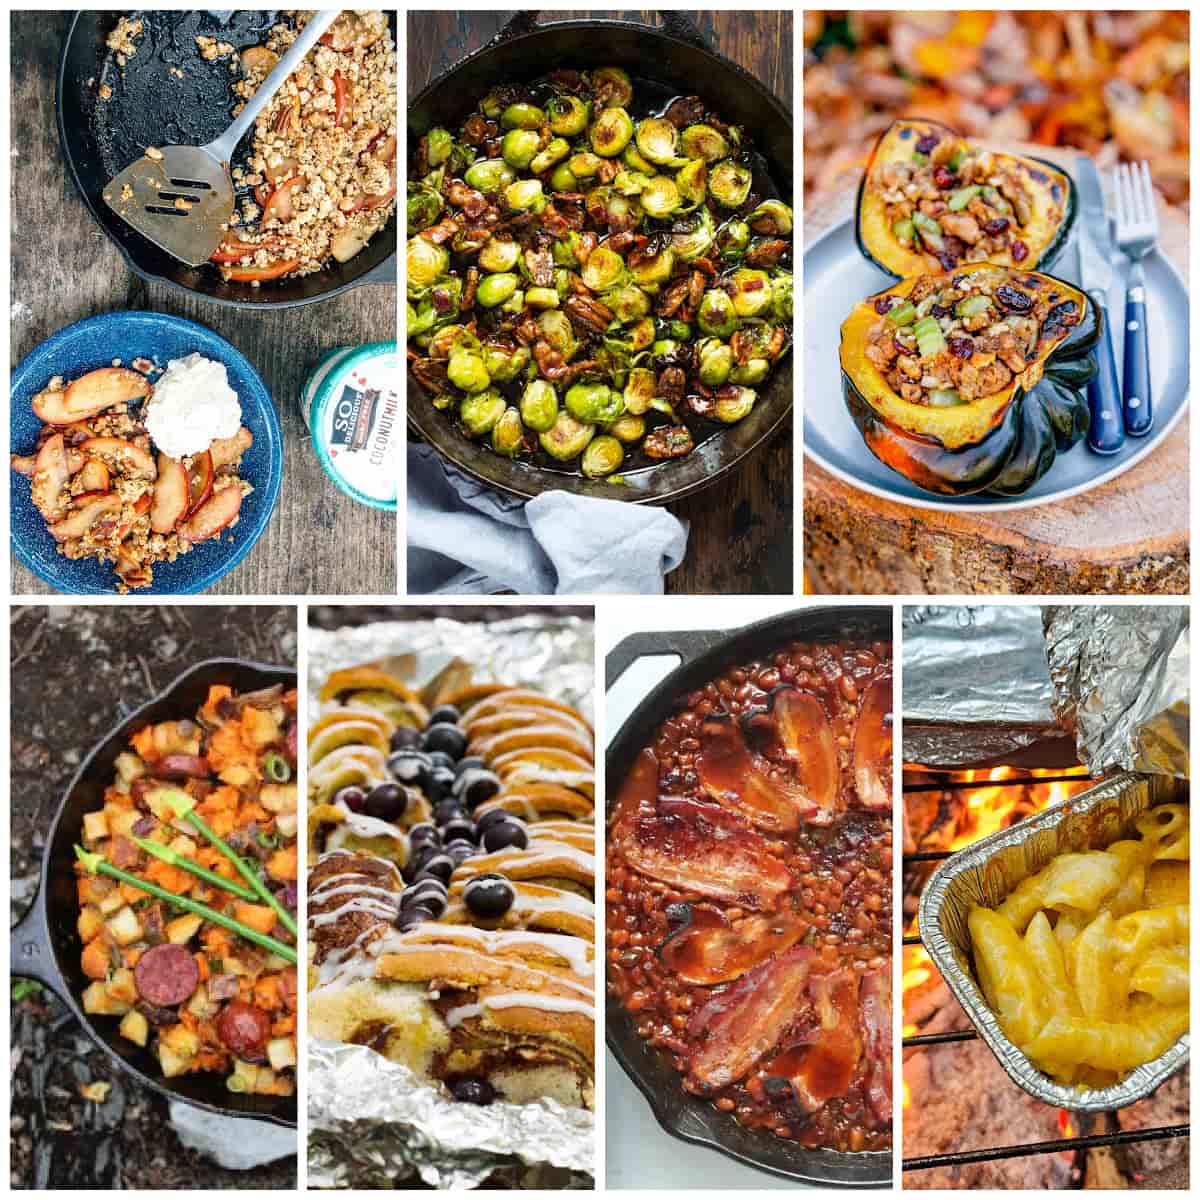 https://refreshcamping.com/wp-content/uploads/2023/09/Fall-camping-recipes-collage-image-1.jpg